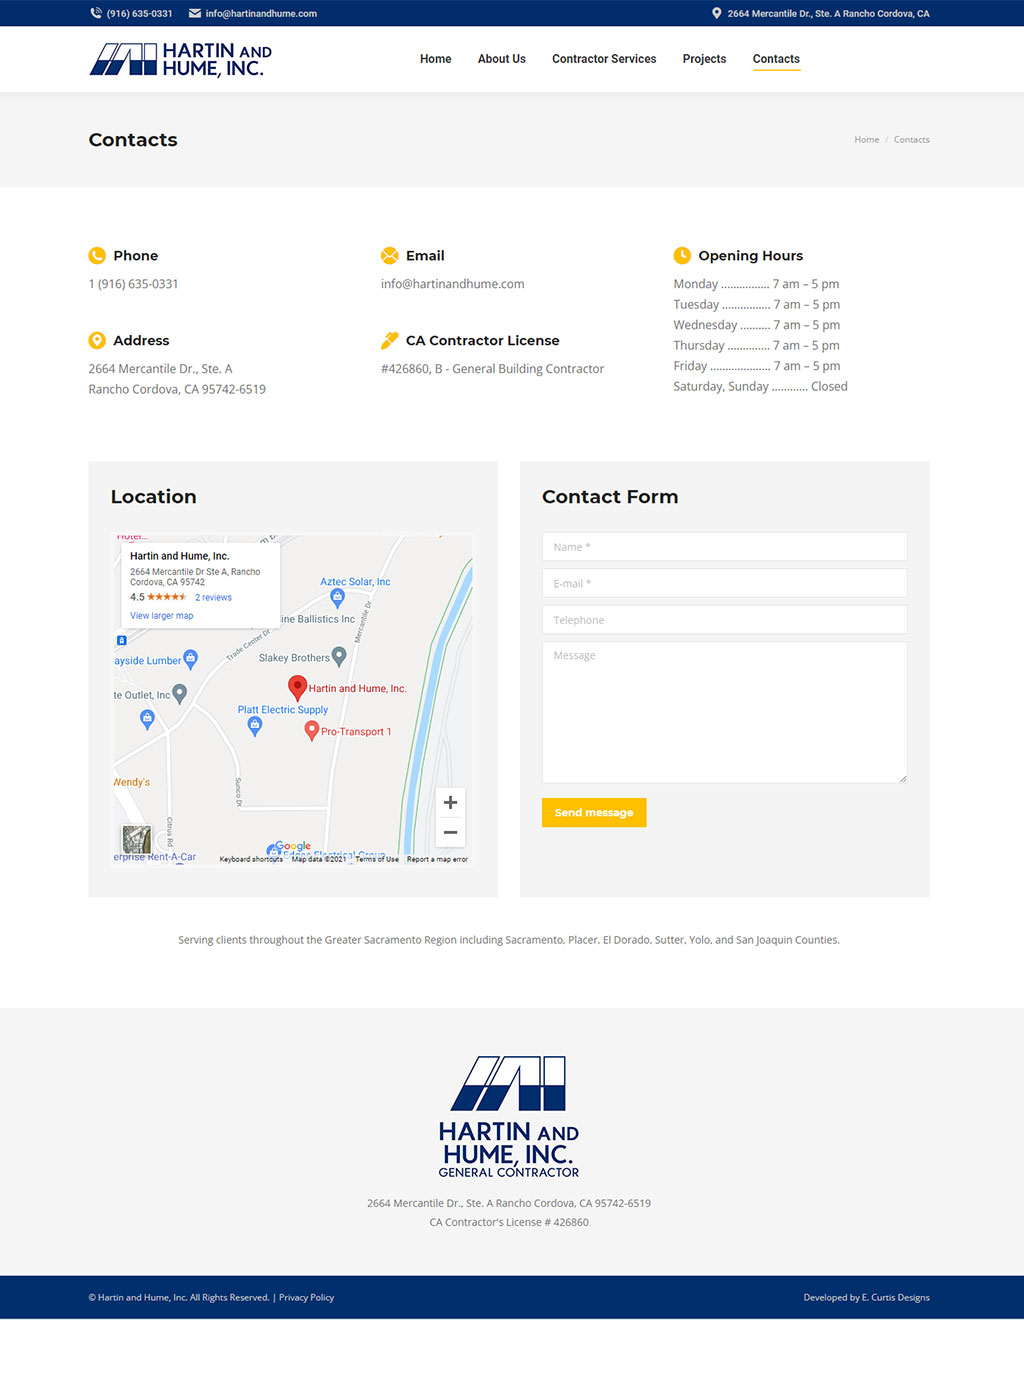 Web development for Hartin and Hume Inc.